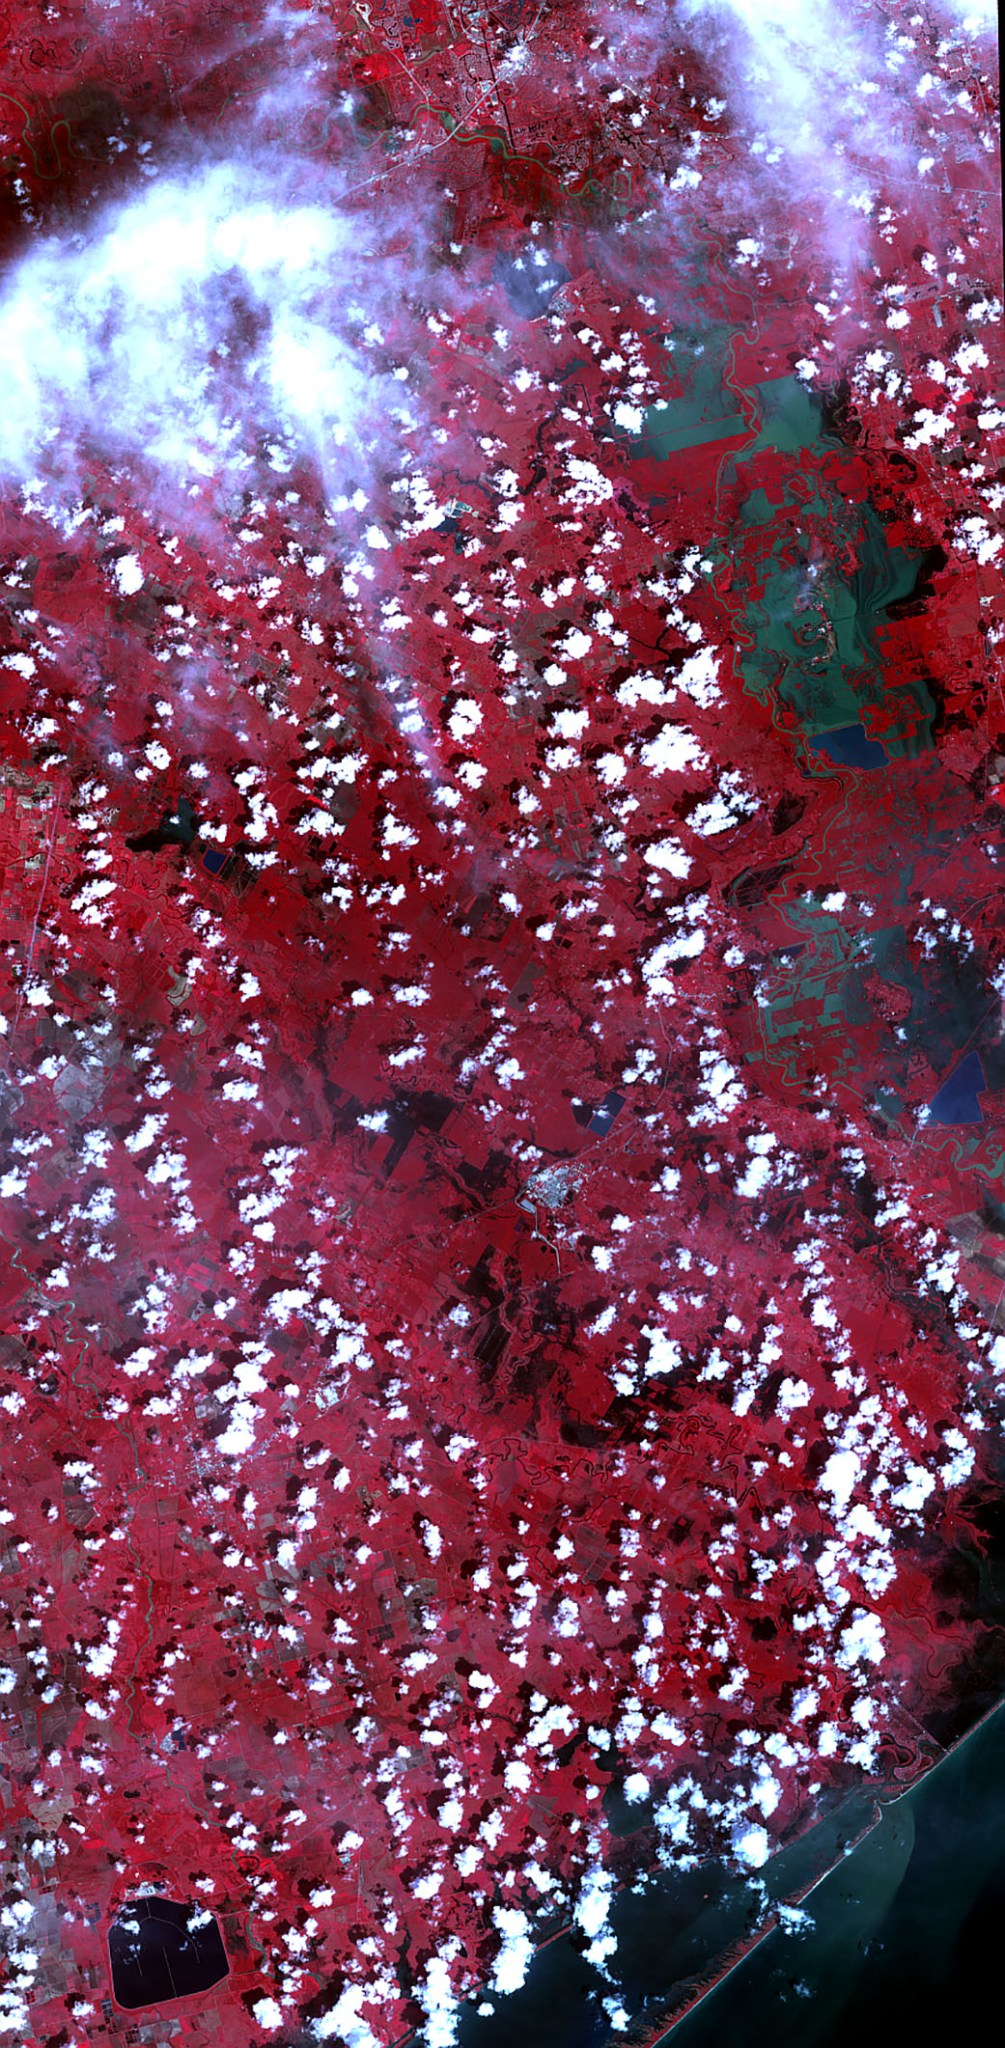 Satellite image of Harvey flooding in false color. The image is dark red on land with flooded areas in blues and greens.